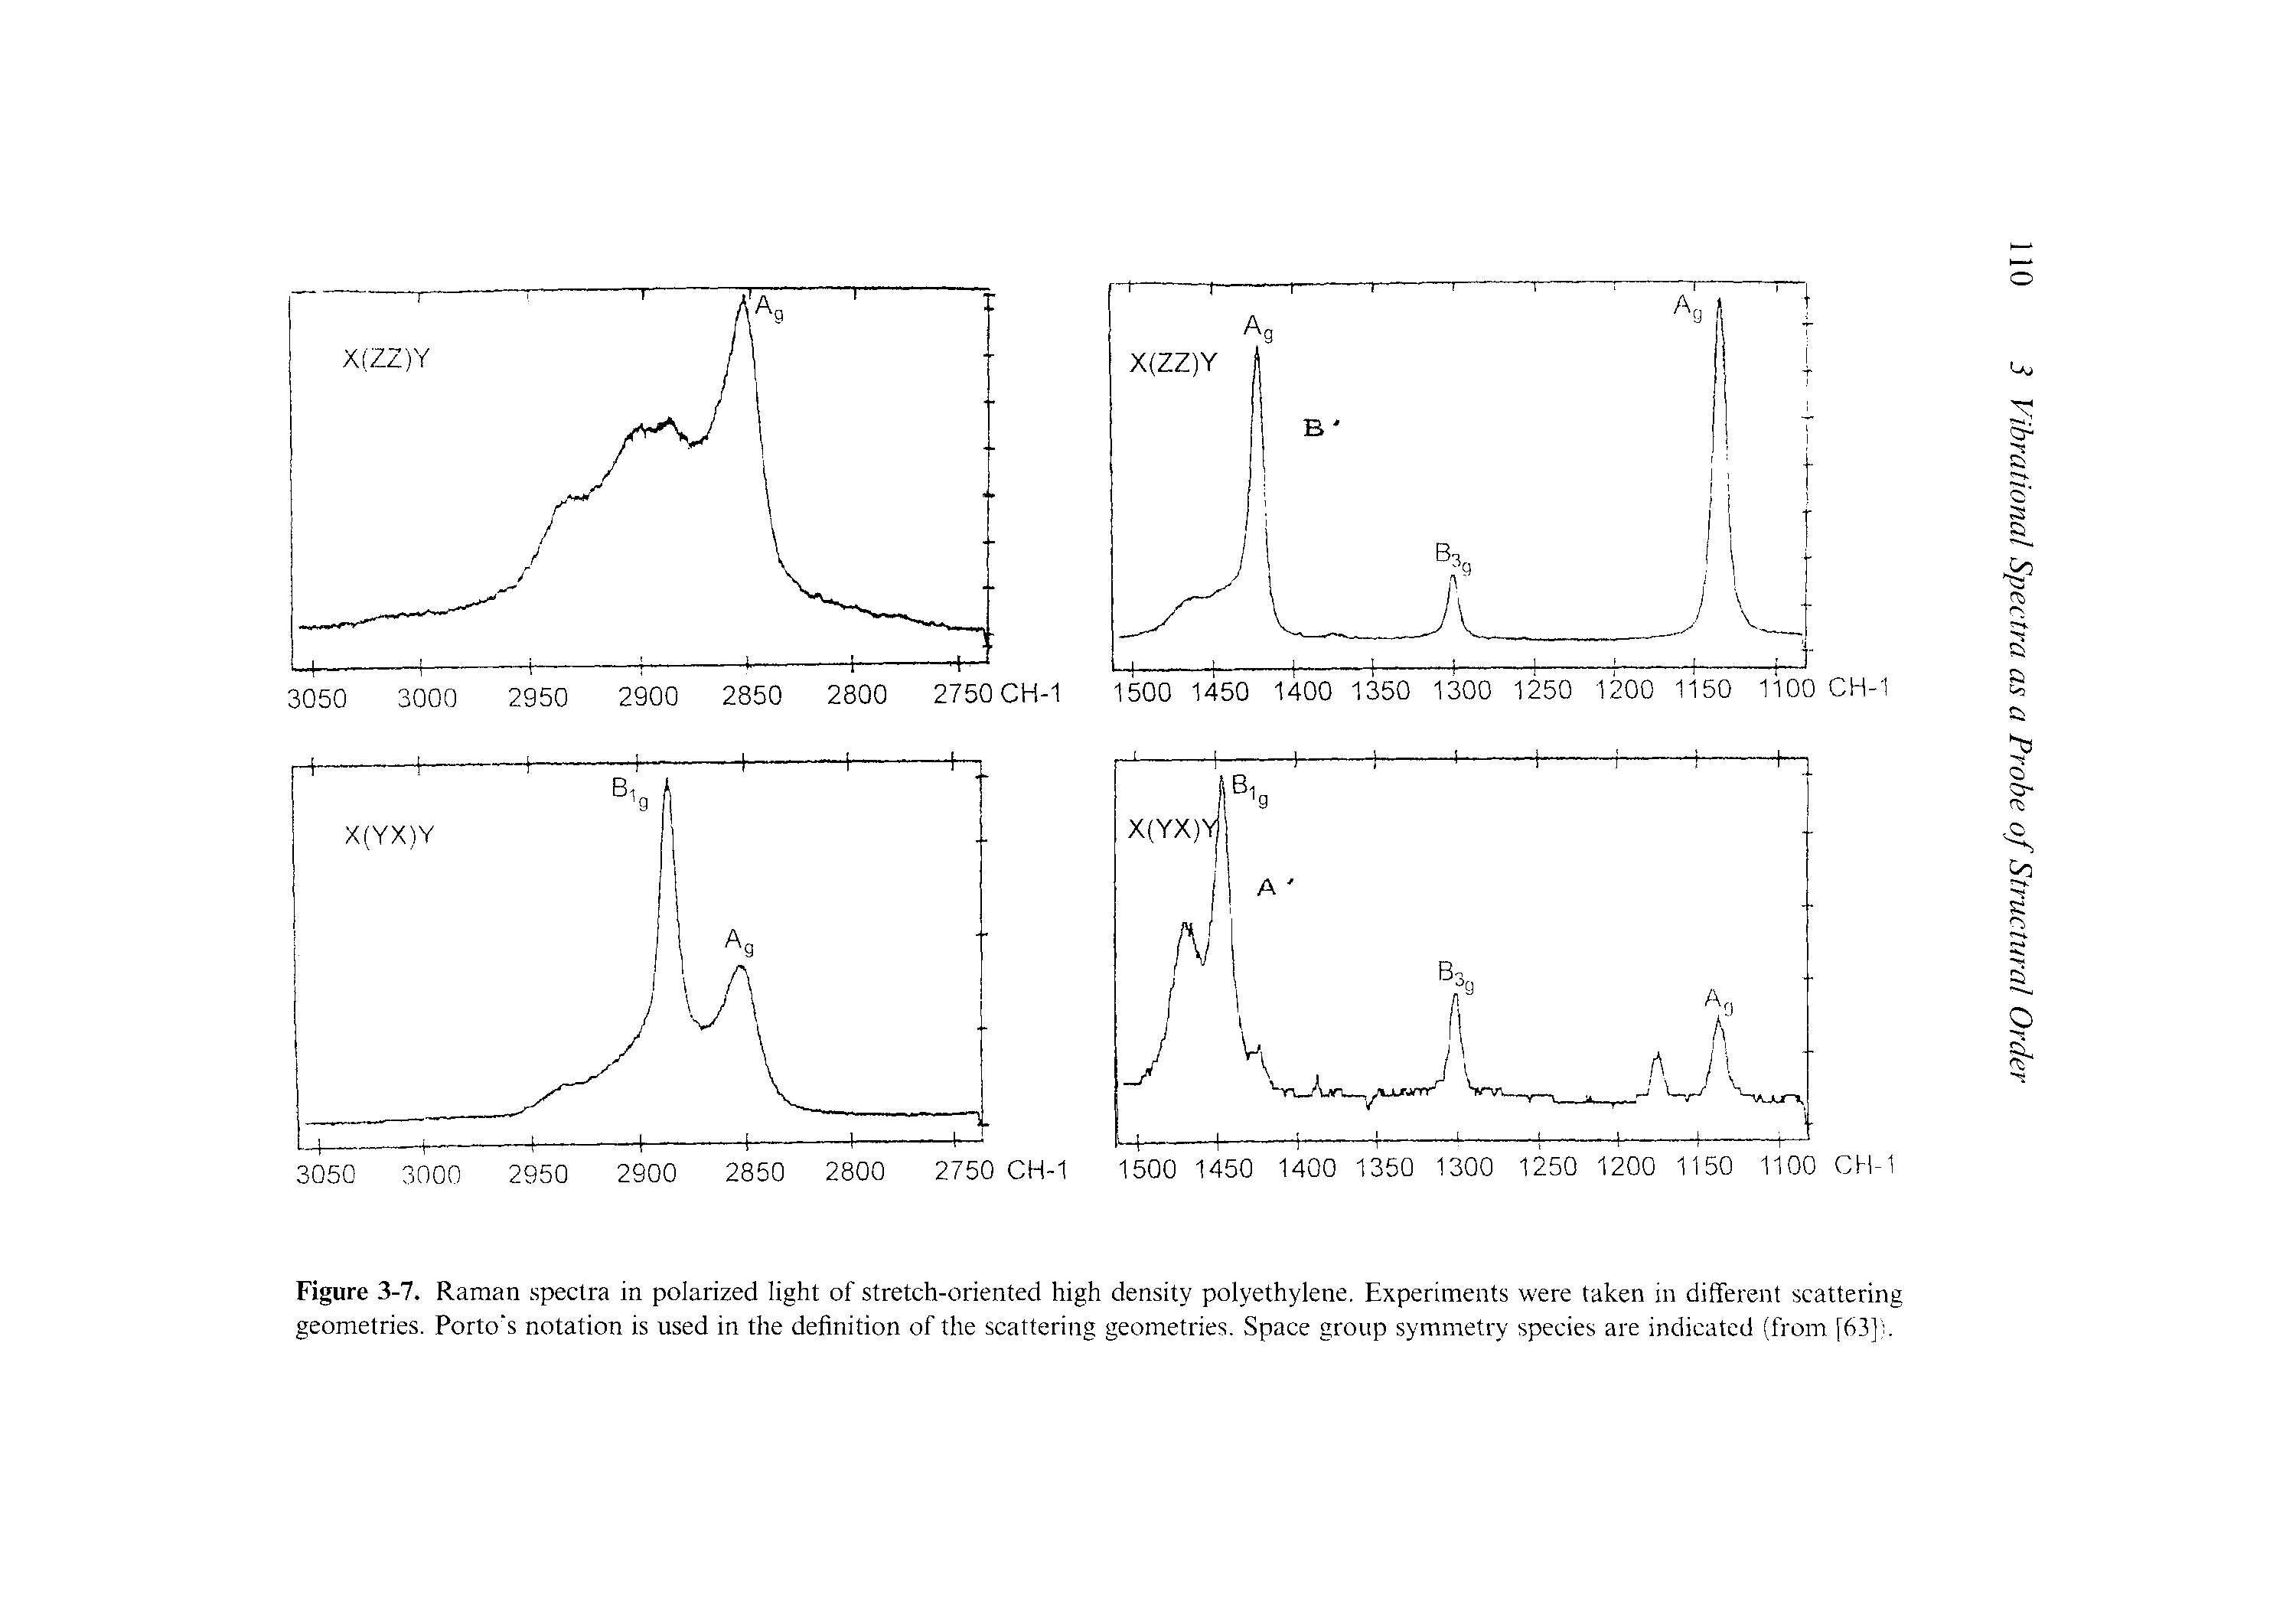 Figure 3-7. Raman spectra in polarized light of stretch-oriented high density polyethylene. Experiments were taken in different scattering geometries. Porto s notation is used in the definition of the scattering geometries. Space group symmetry species are indicated (from f63]i.